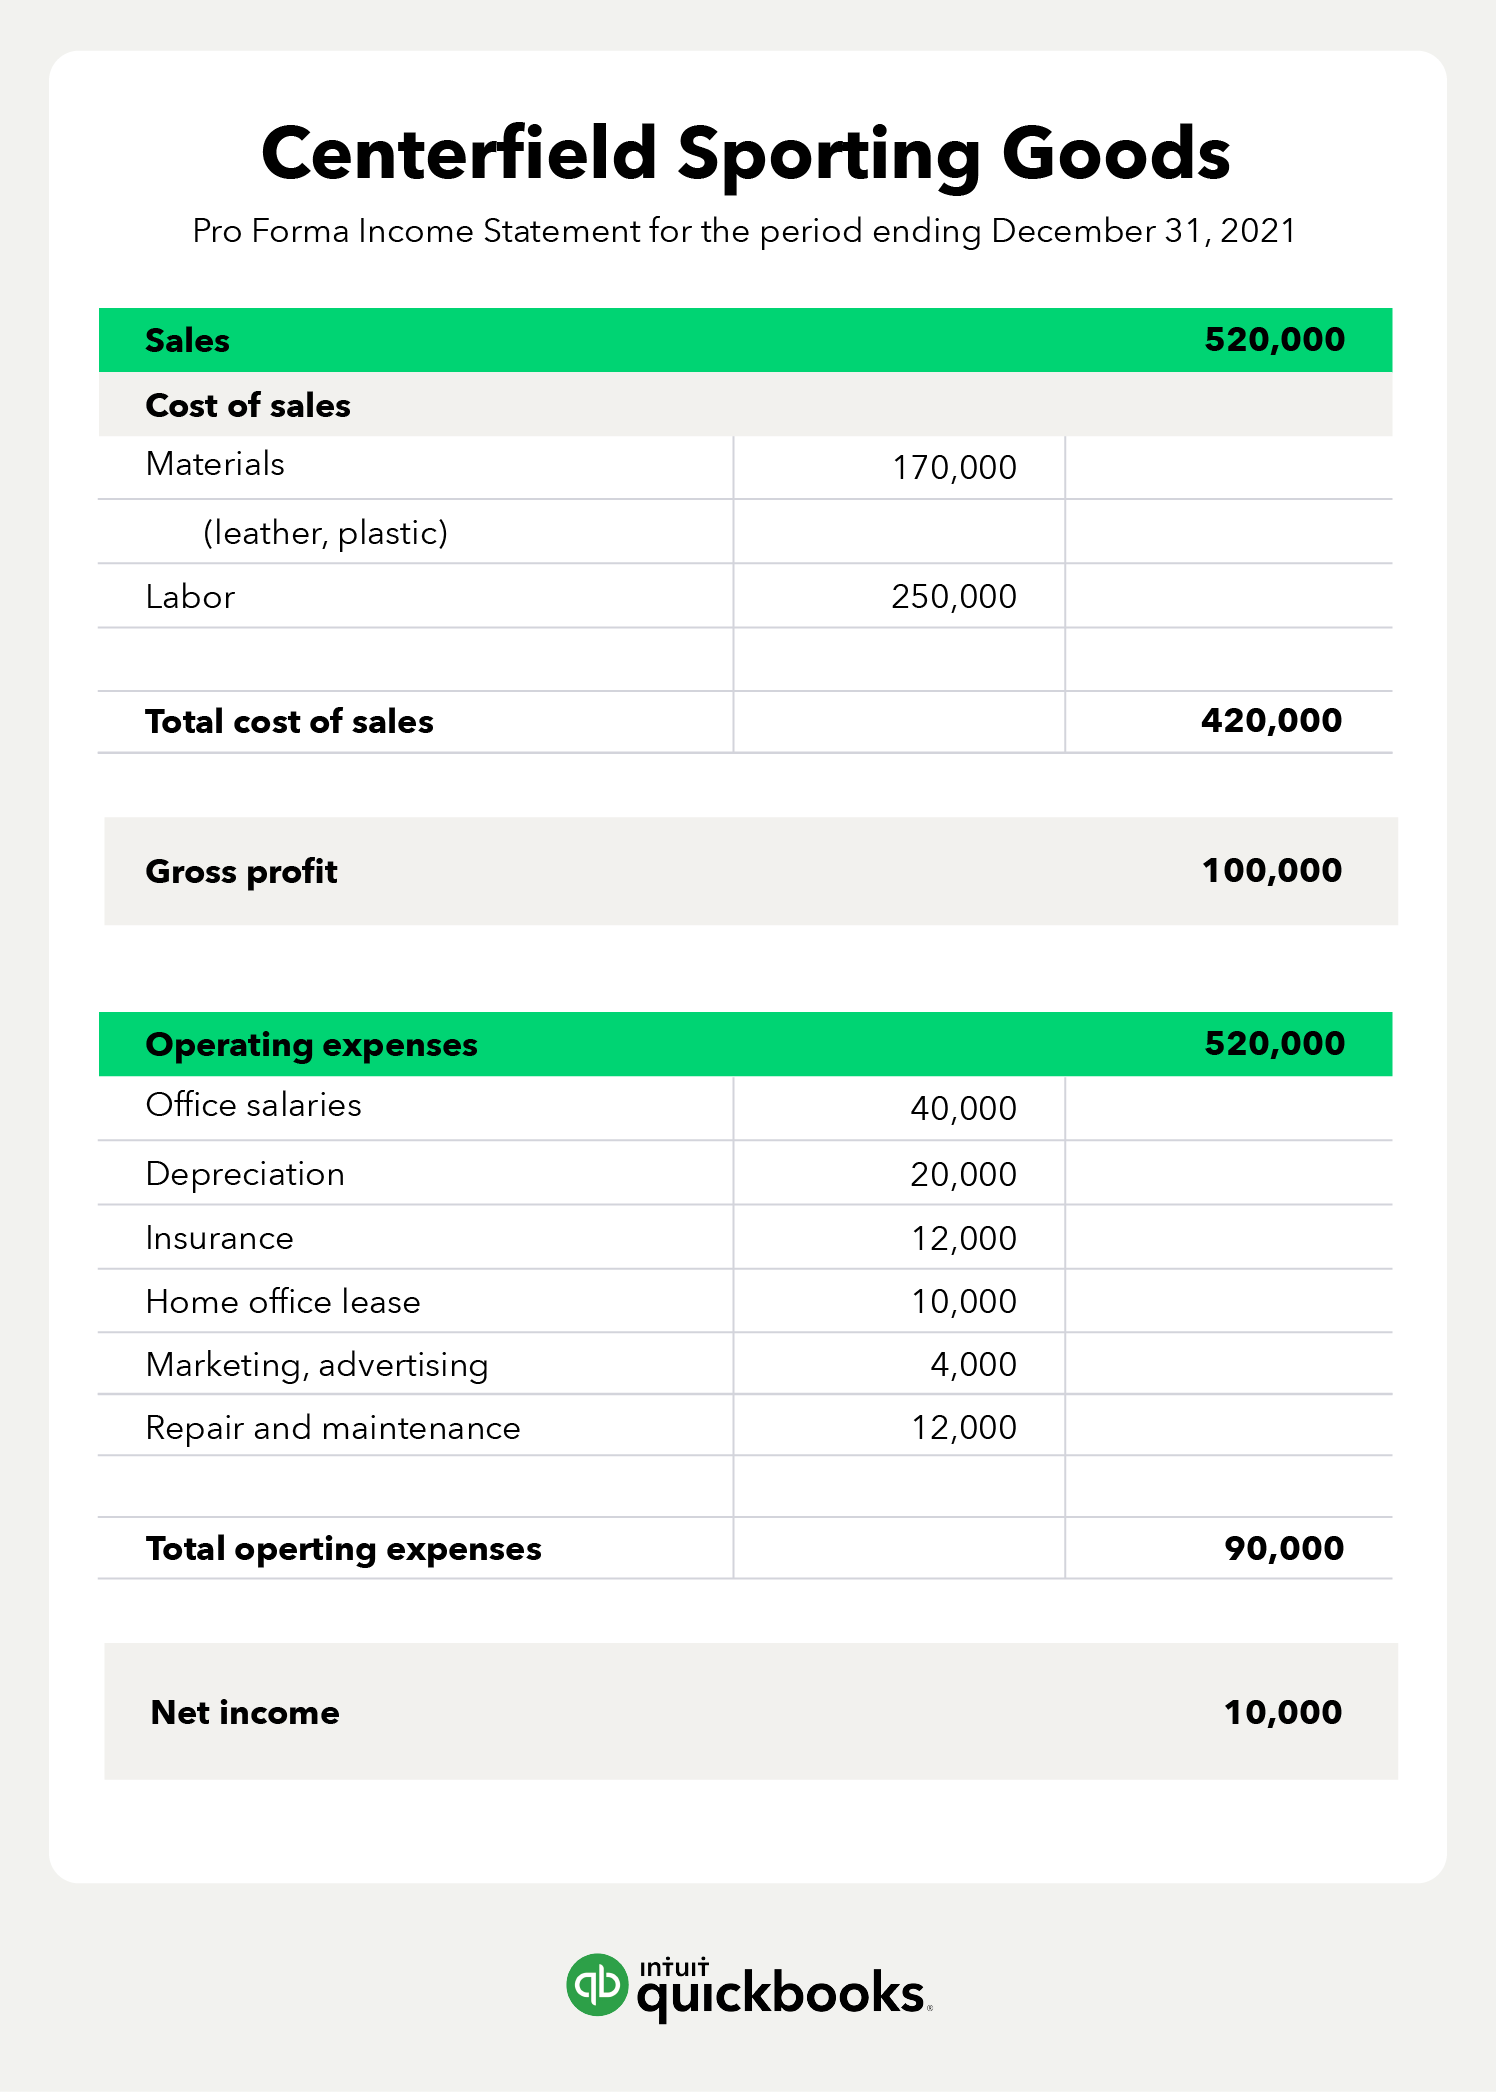 Example of a pro forma income statement